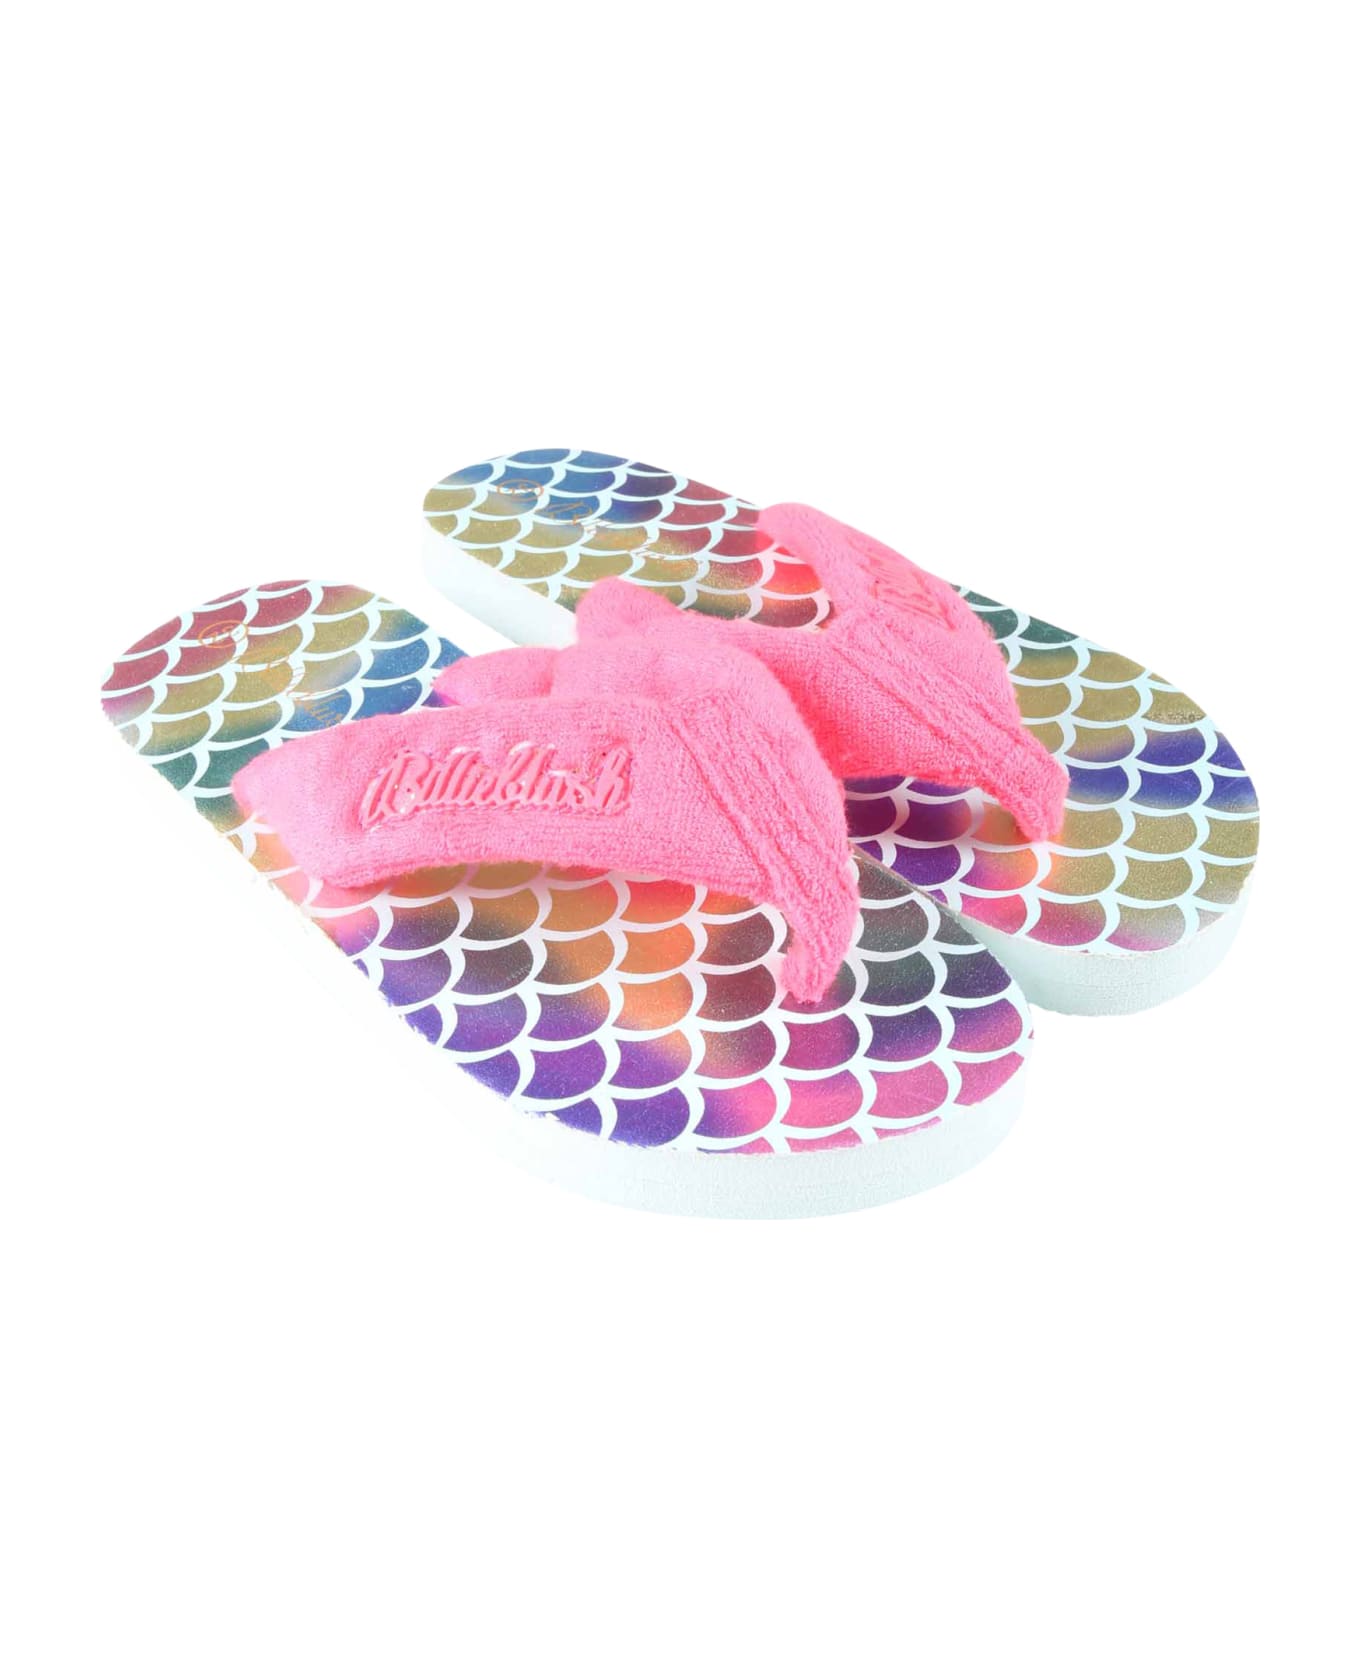 Billieblush Multicolor Flip-flops For Girl With adapted - Pink